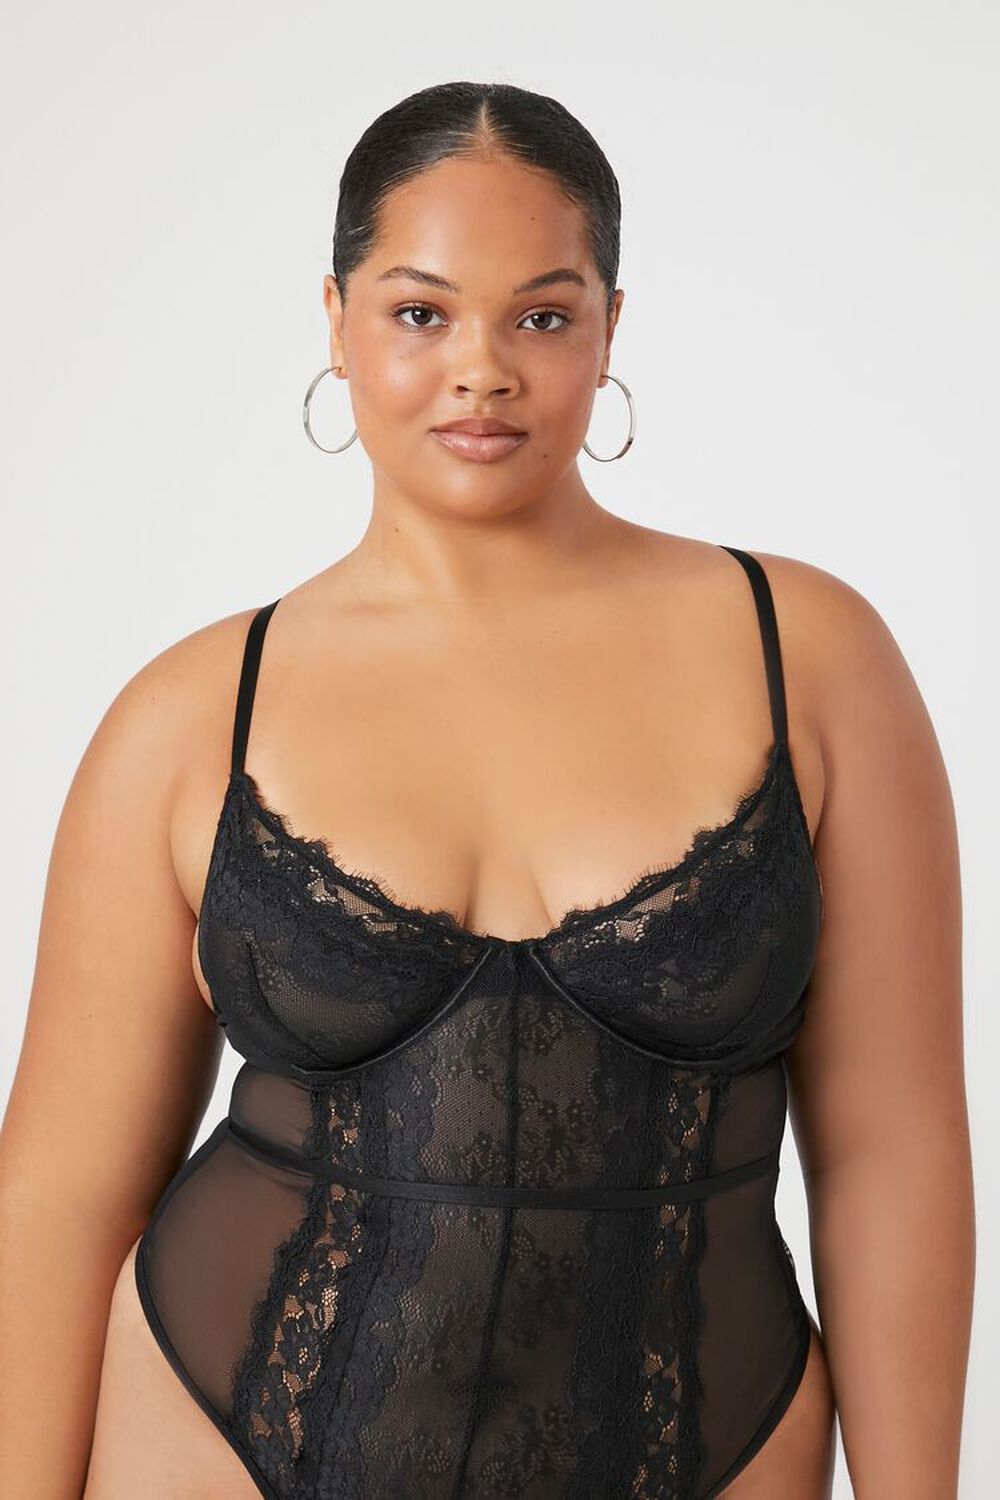 Women Plus Size Metal Strap See Through Underwired Bodysuit Lingerie, Shop  Today. Get it Tomorrow!